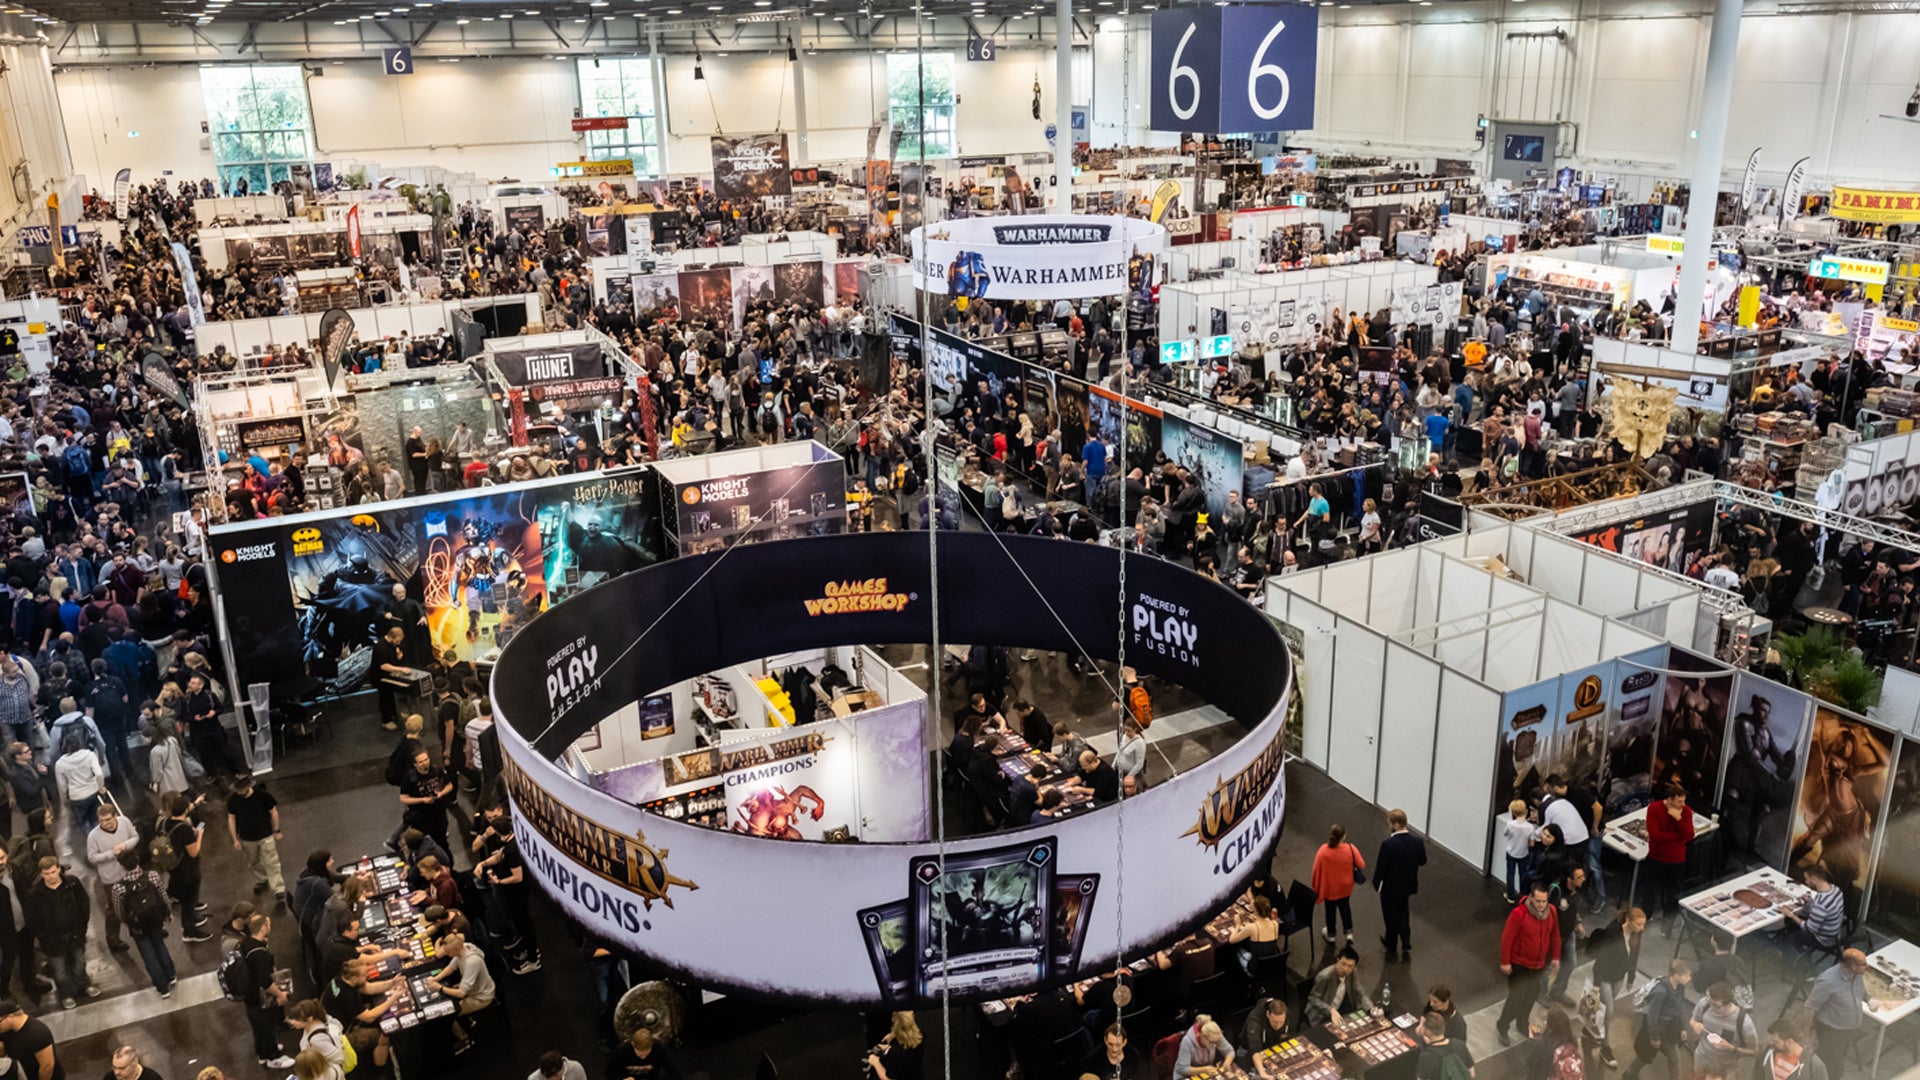 Cancelled Essen Spiel 2020 board game convention replaced by online